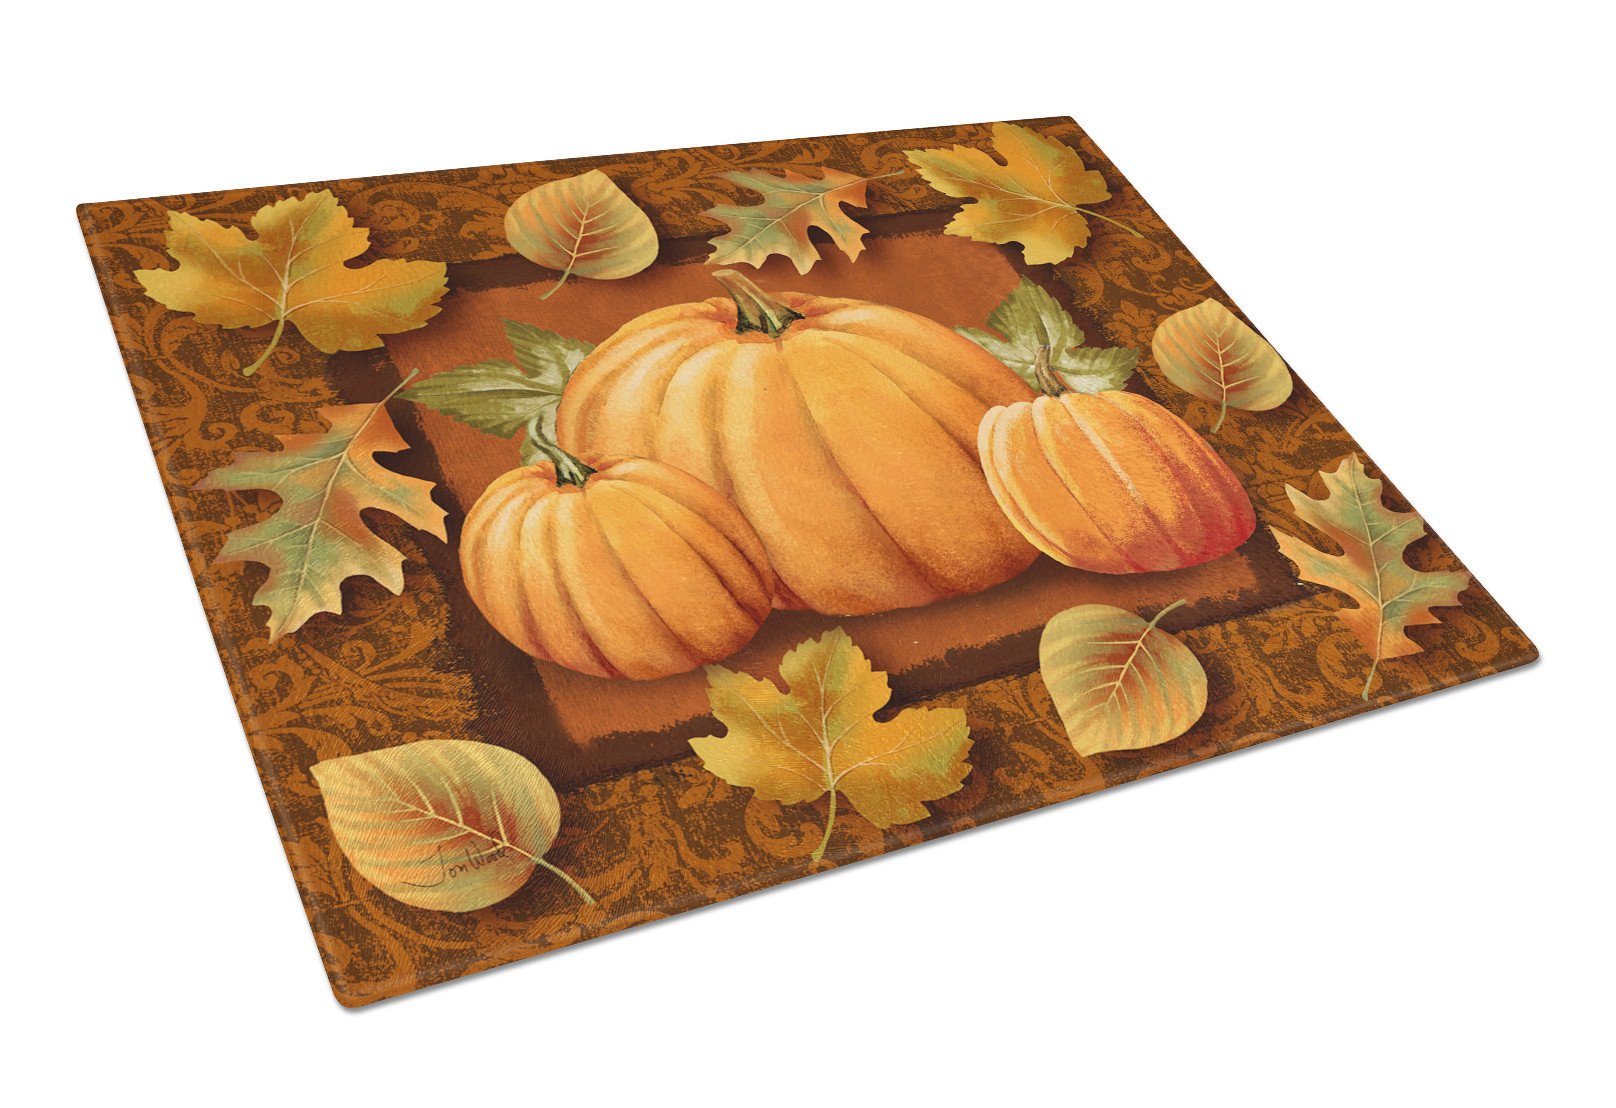 Pumpkins and Fall Leaves Glass Cutting Board Large PTW2009LCB by Caroline's Treasures